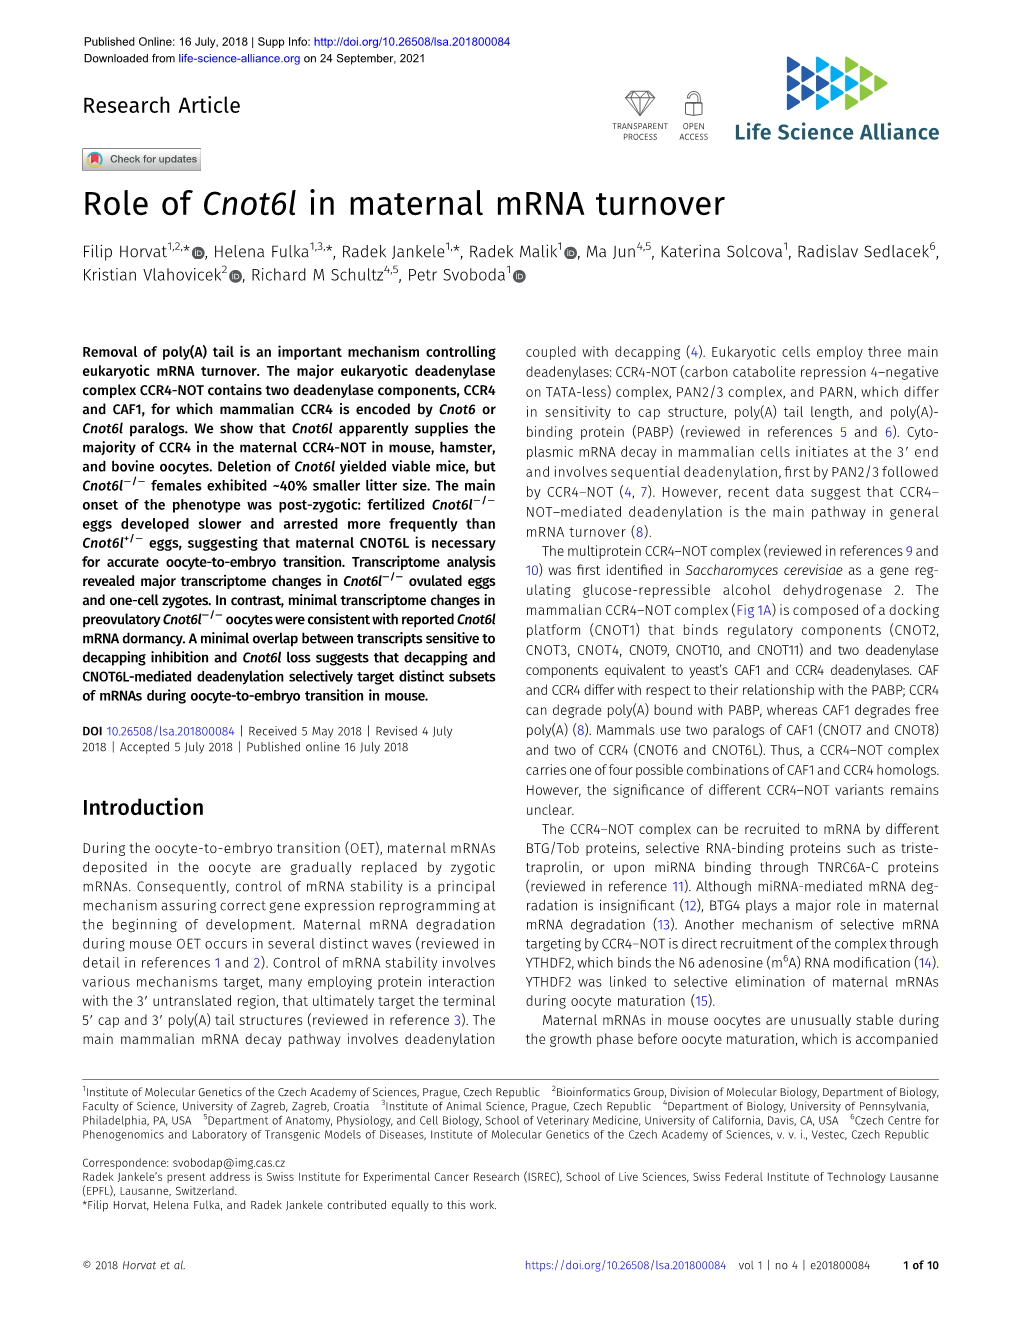 Role of Cnot6l in Maternal Mrna Turnover